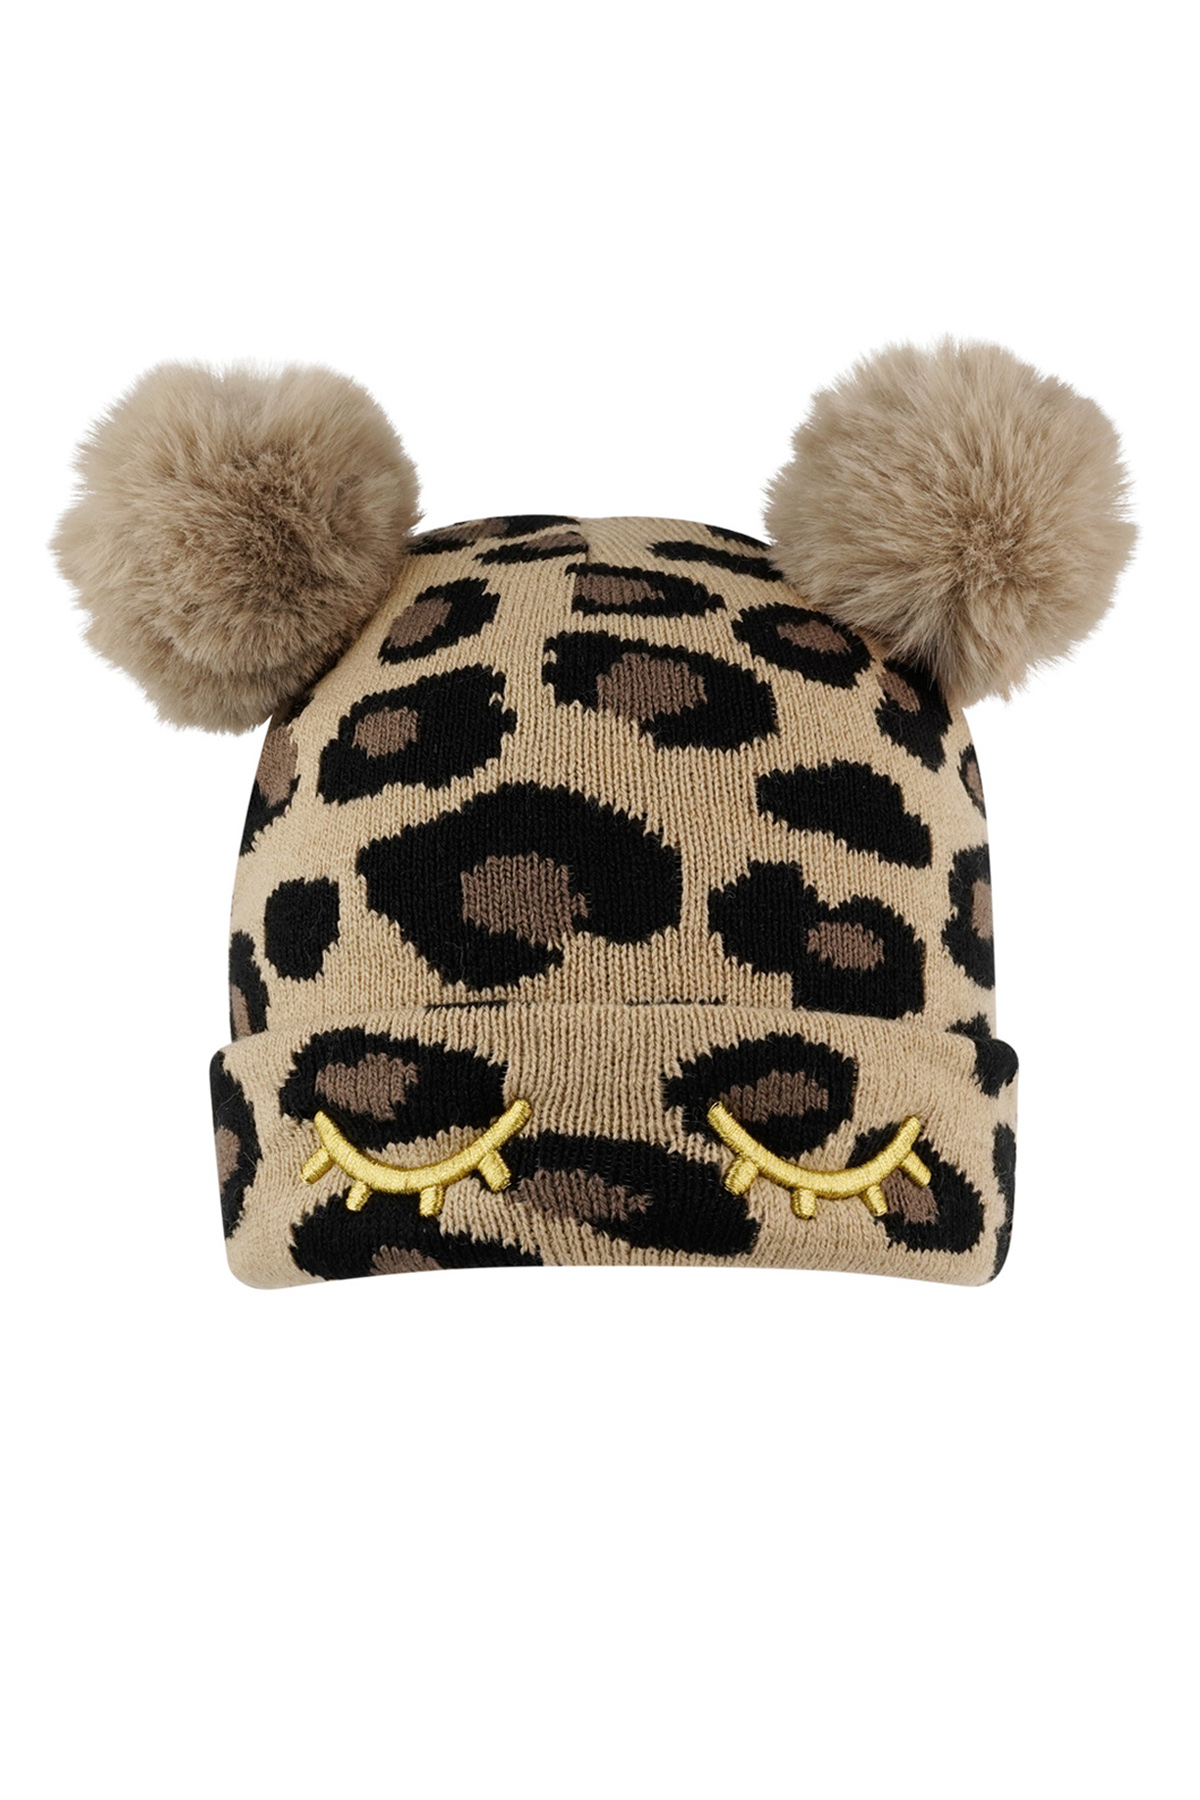 Adult - leopard print hat with balls h5 